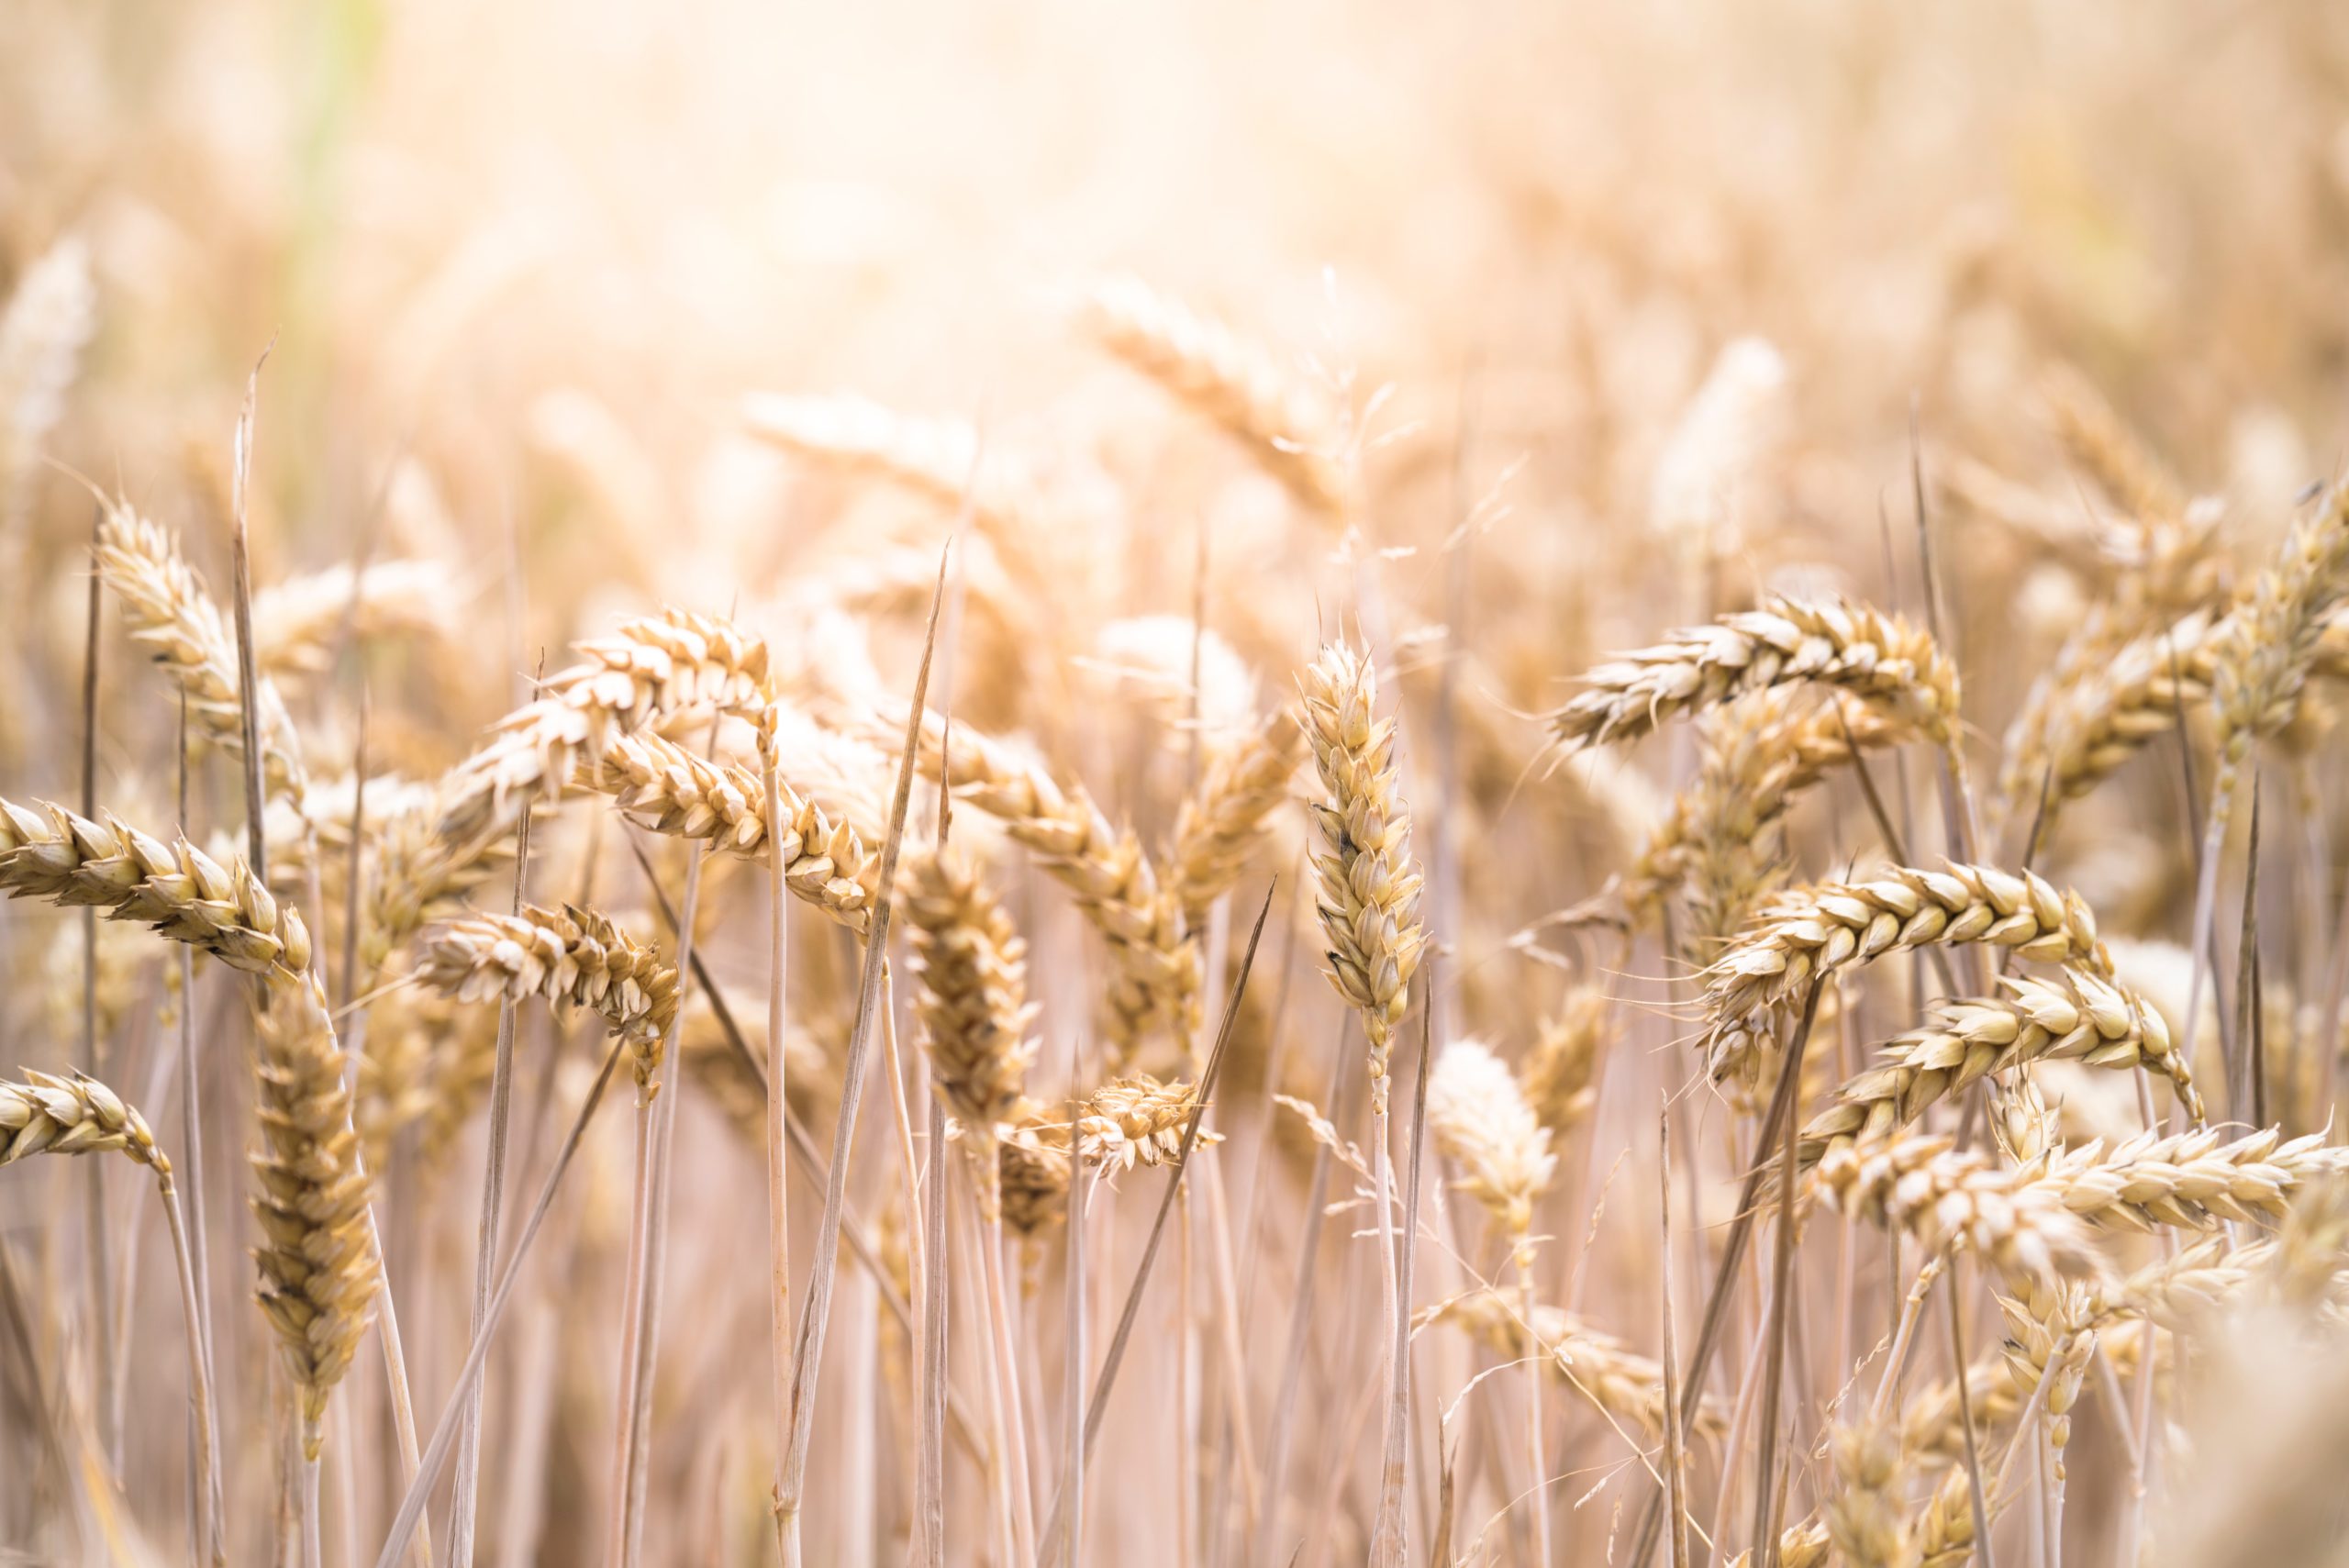 Whole grain, whole wheat, refined grain, and enriched grain – what are the differences?